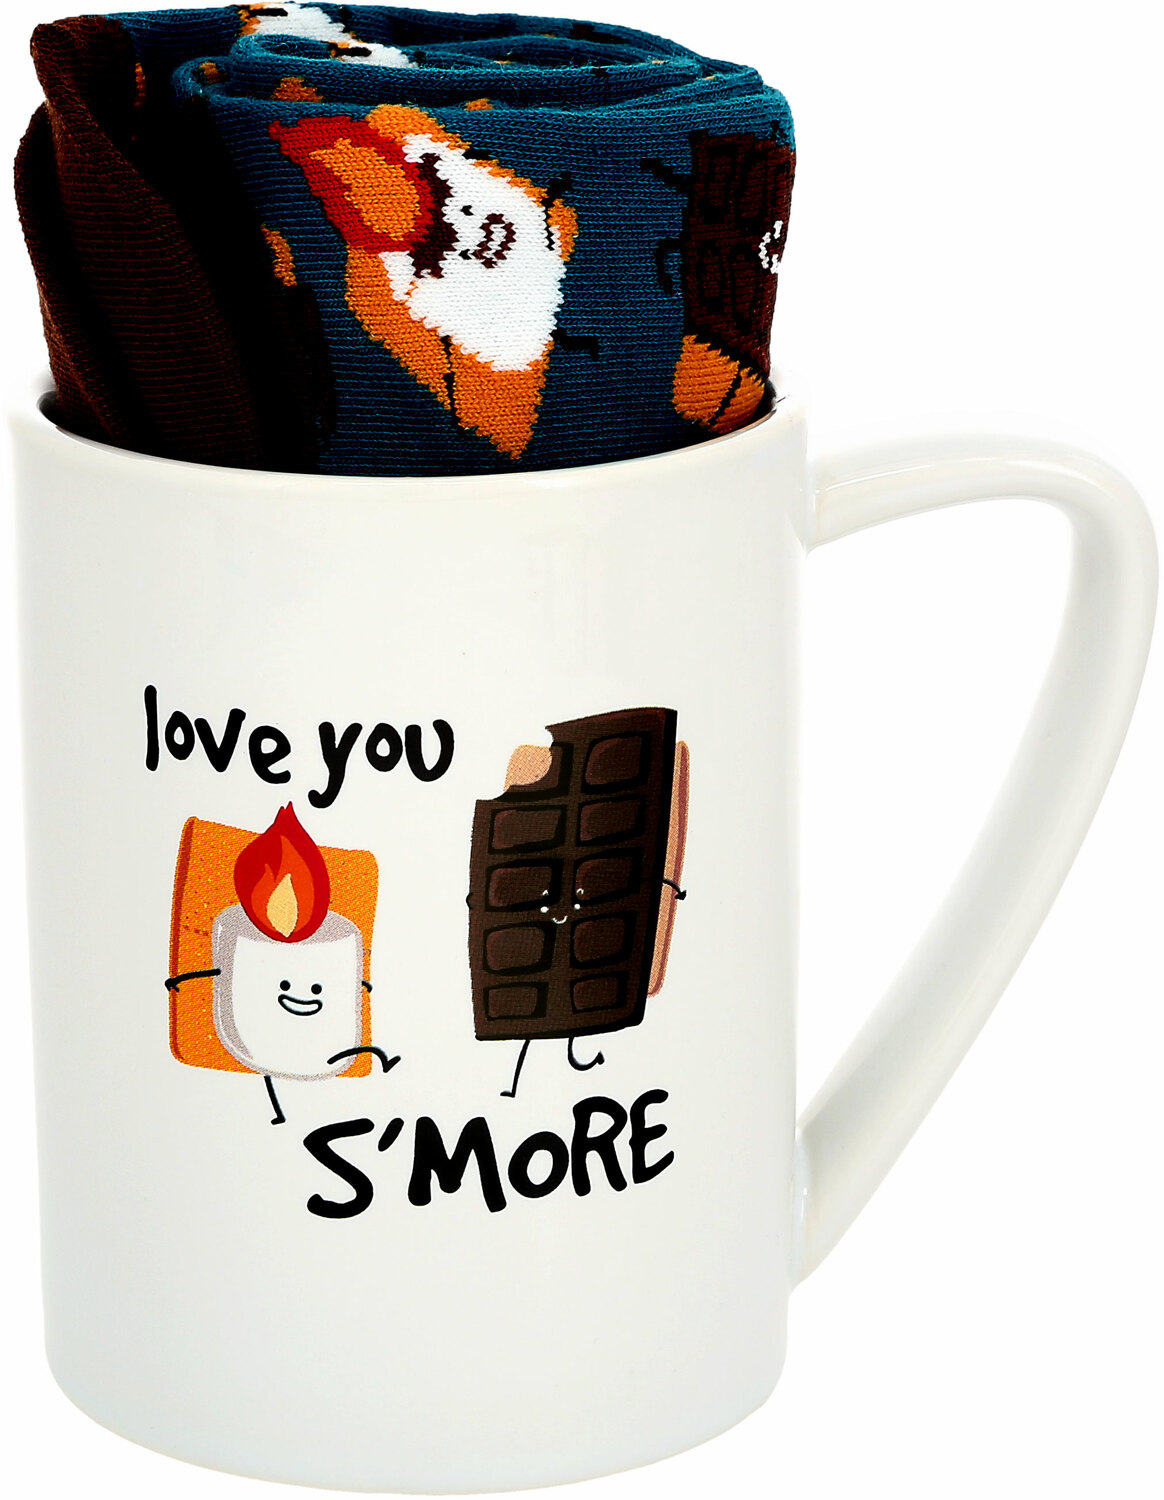 Love You S'more by Late Night Snacks - Love You S'more - 18 oz Mug and Sock Set